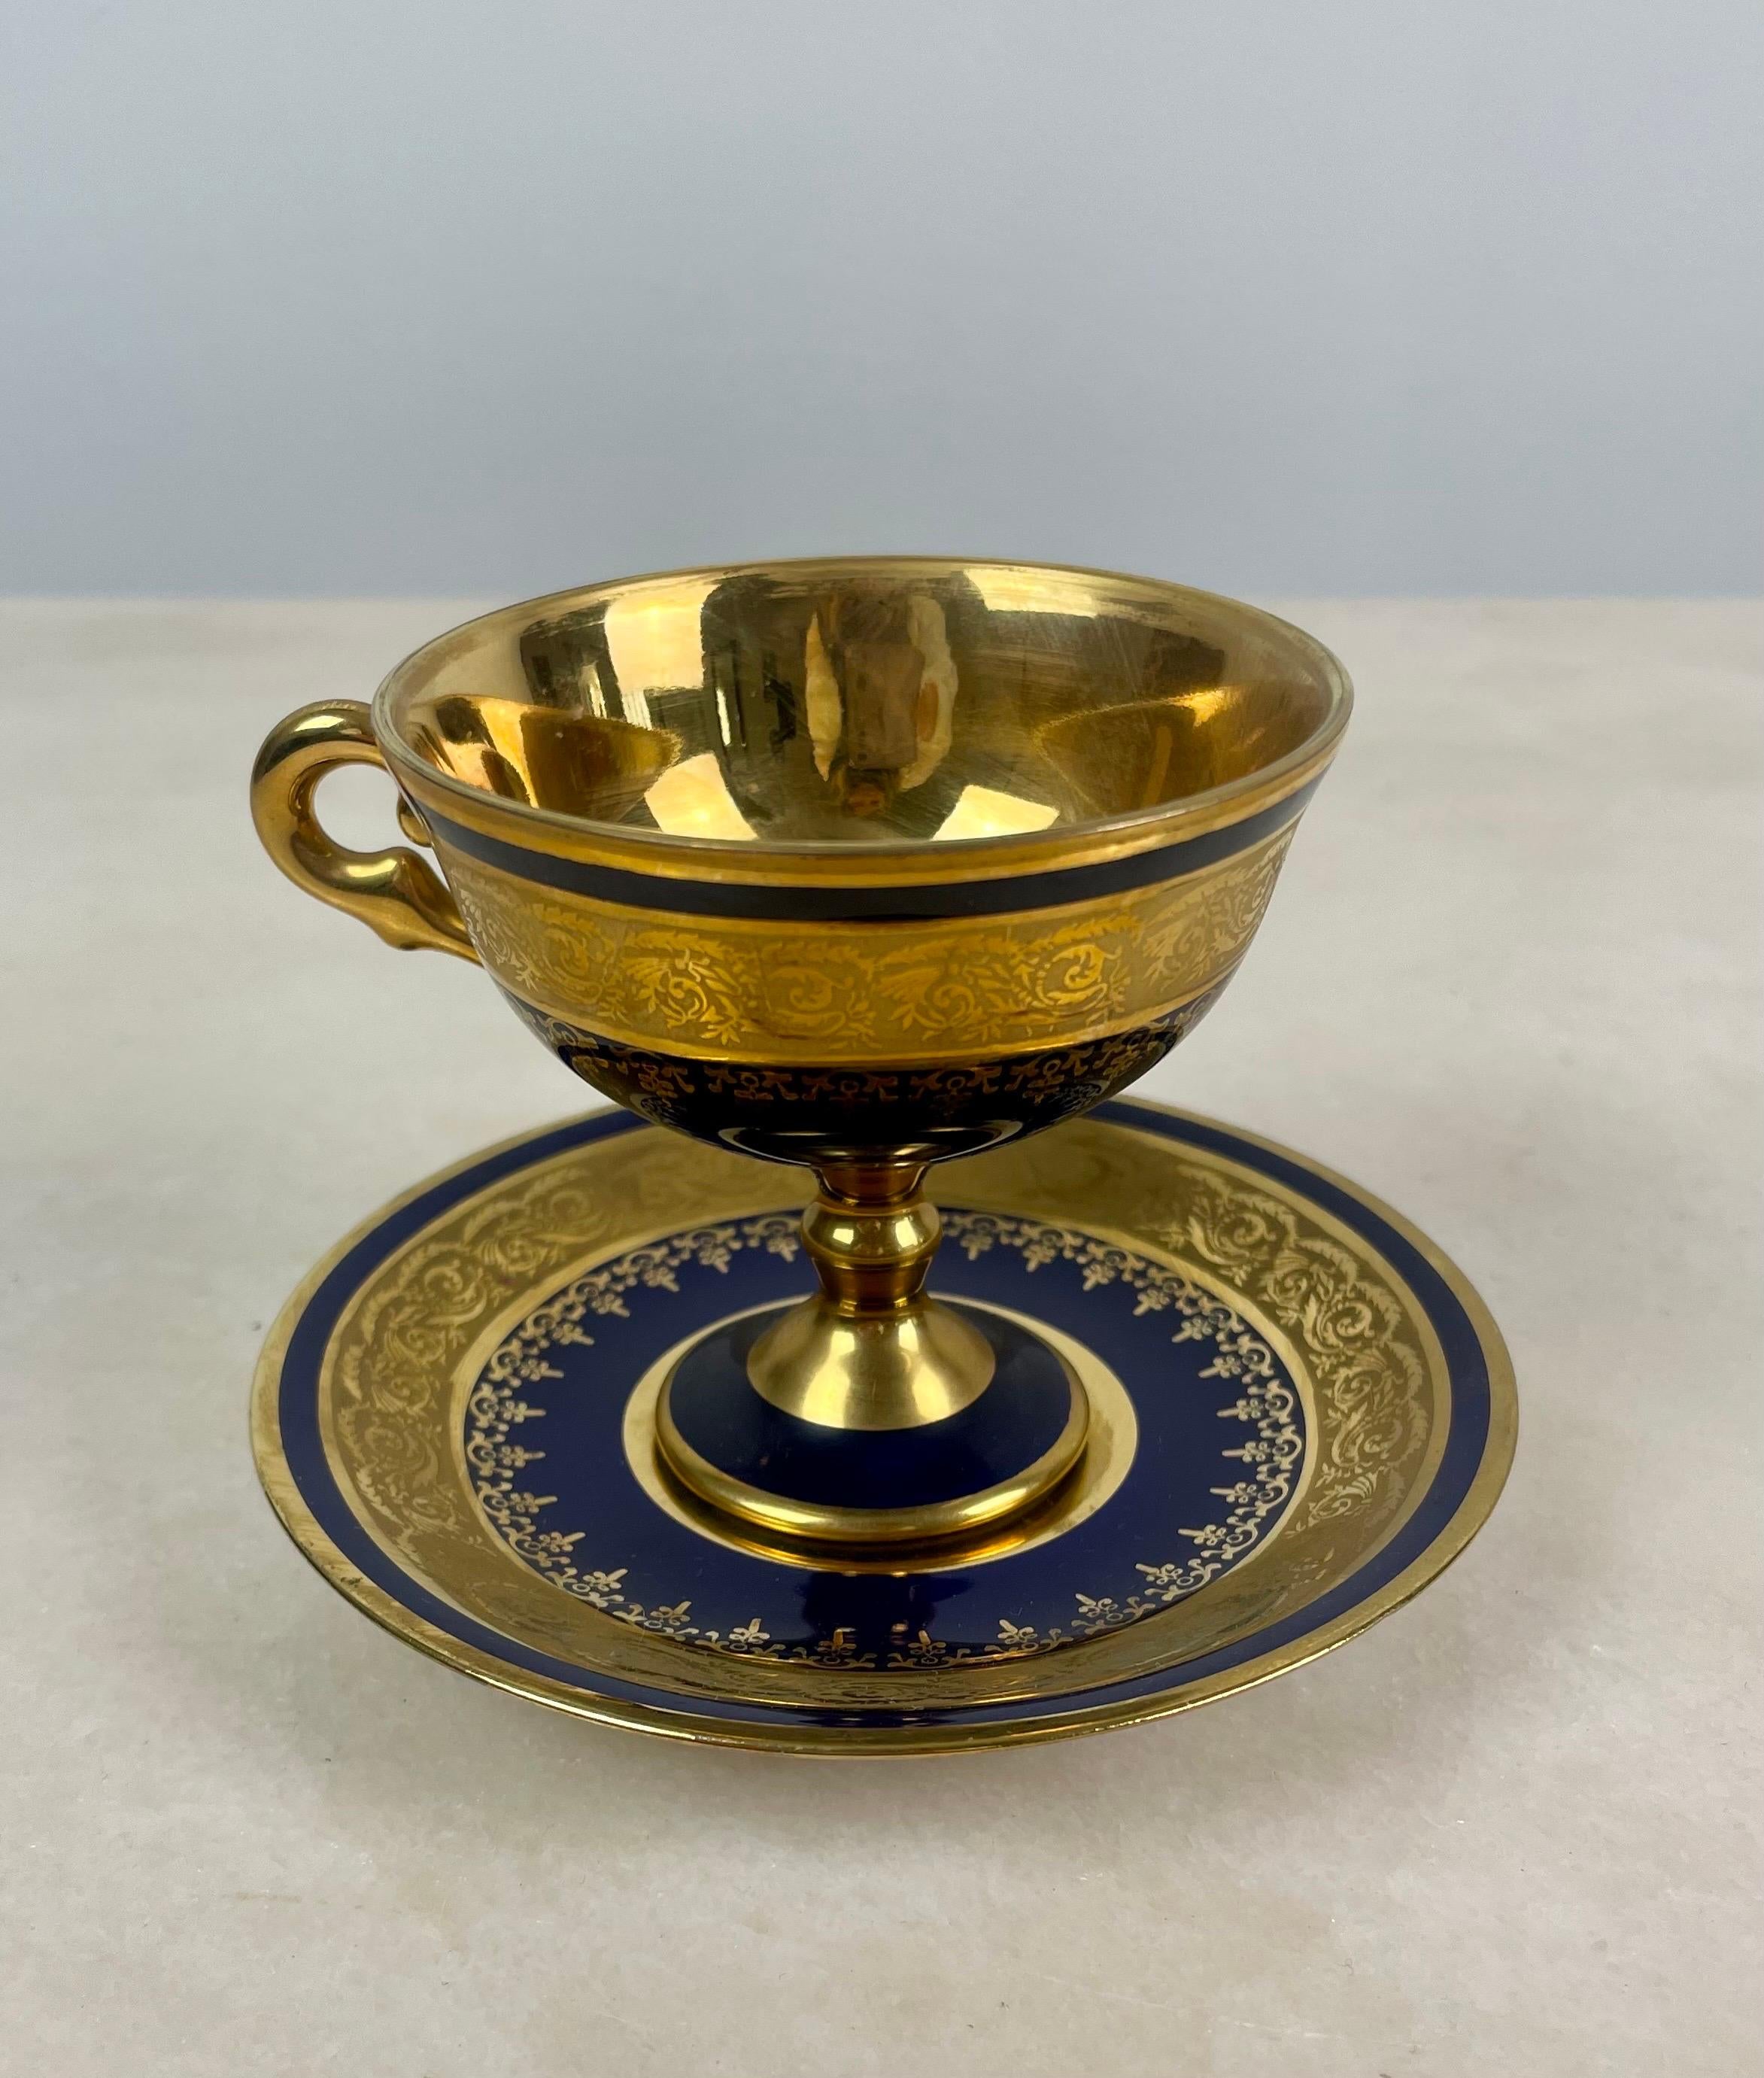 Elegant cup and saucer in cobalt blue and gold Limoges porcelain.
Limoges porcelain by André Prévot, decorative manufacturer from 1952 to 1963.
Stamped Limoges France AP.
The cup is very elegant and refined due to the height of its foot.
The